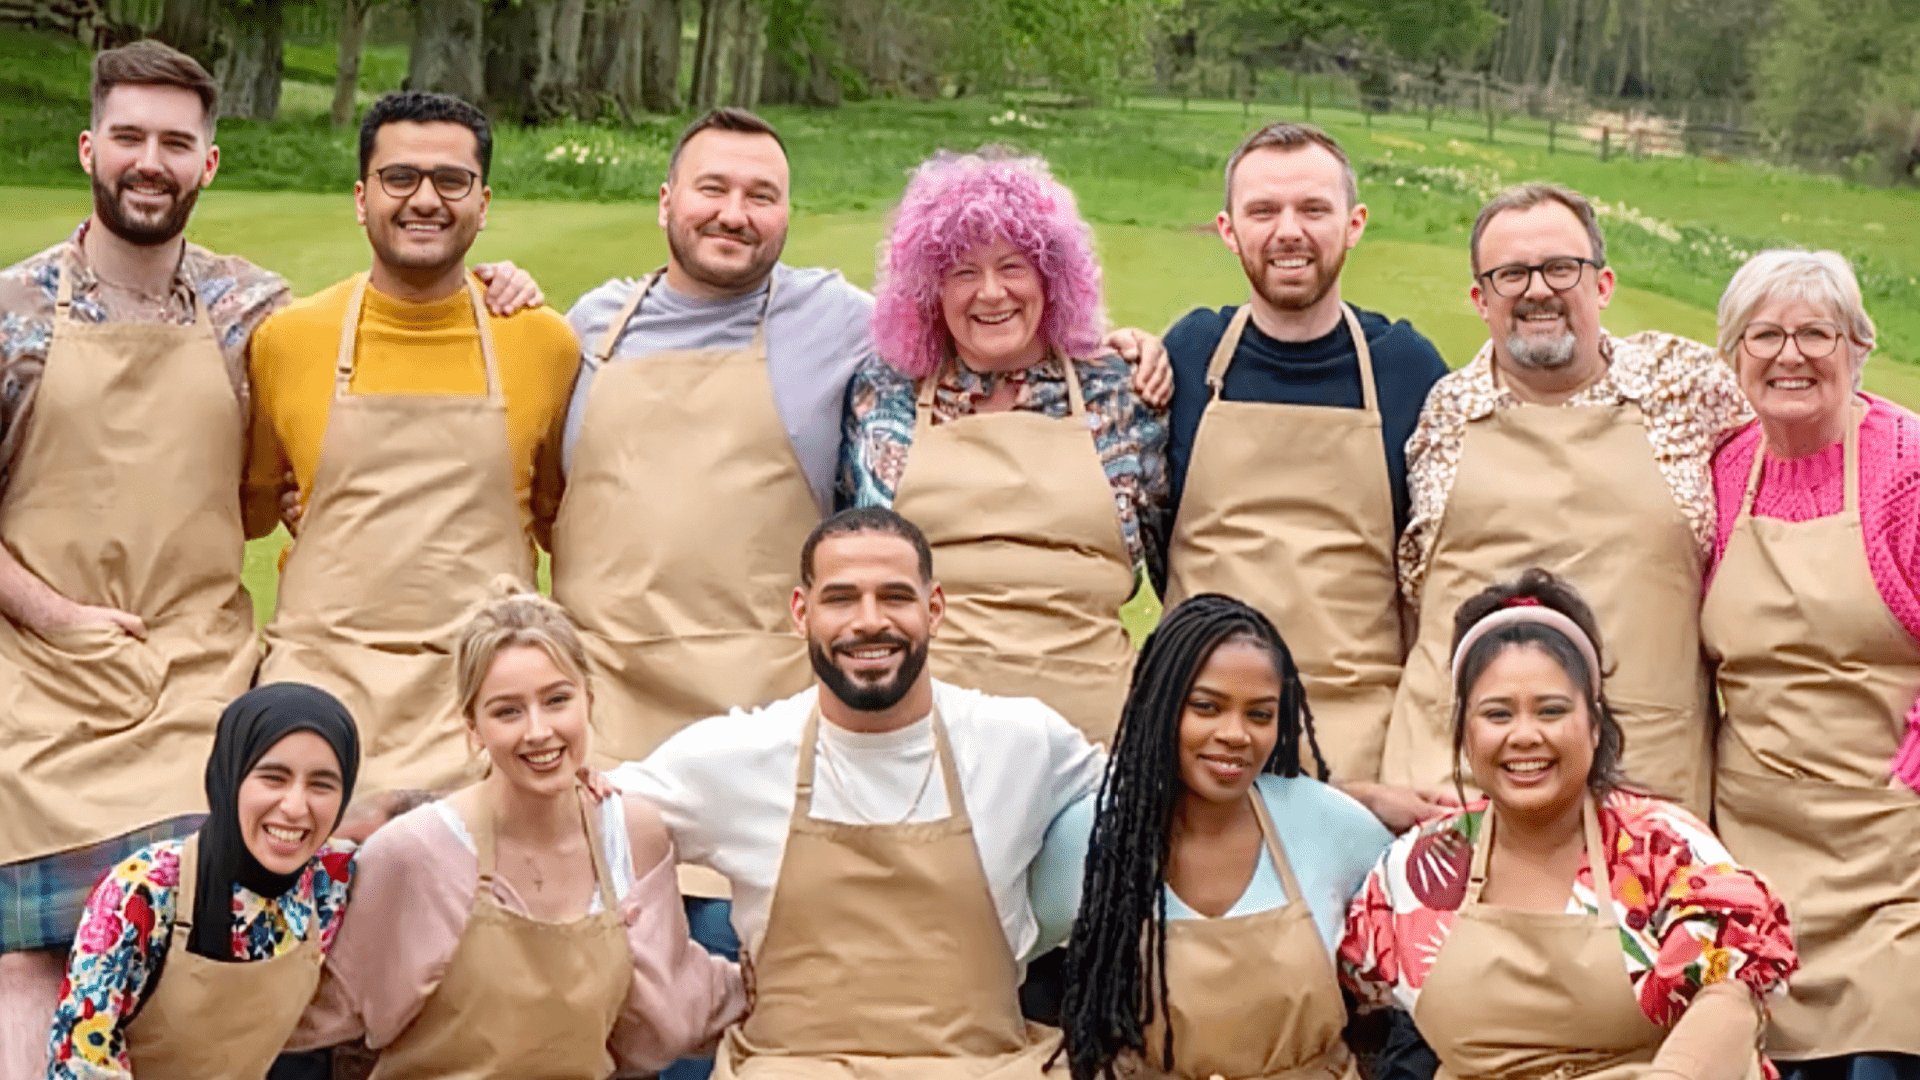 Bake Off Contestants 2022 - Meet The Bakers! Who Is On The Great British Bake Off Season 13?